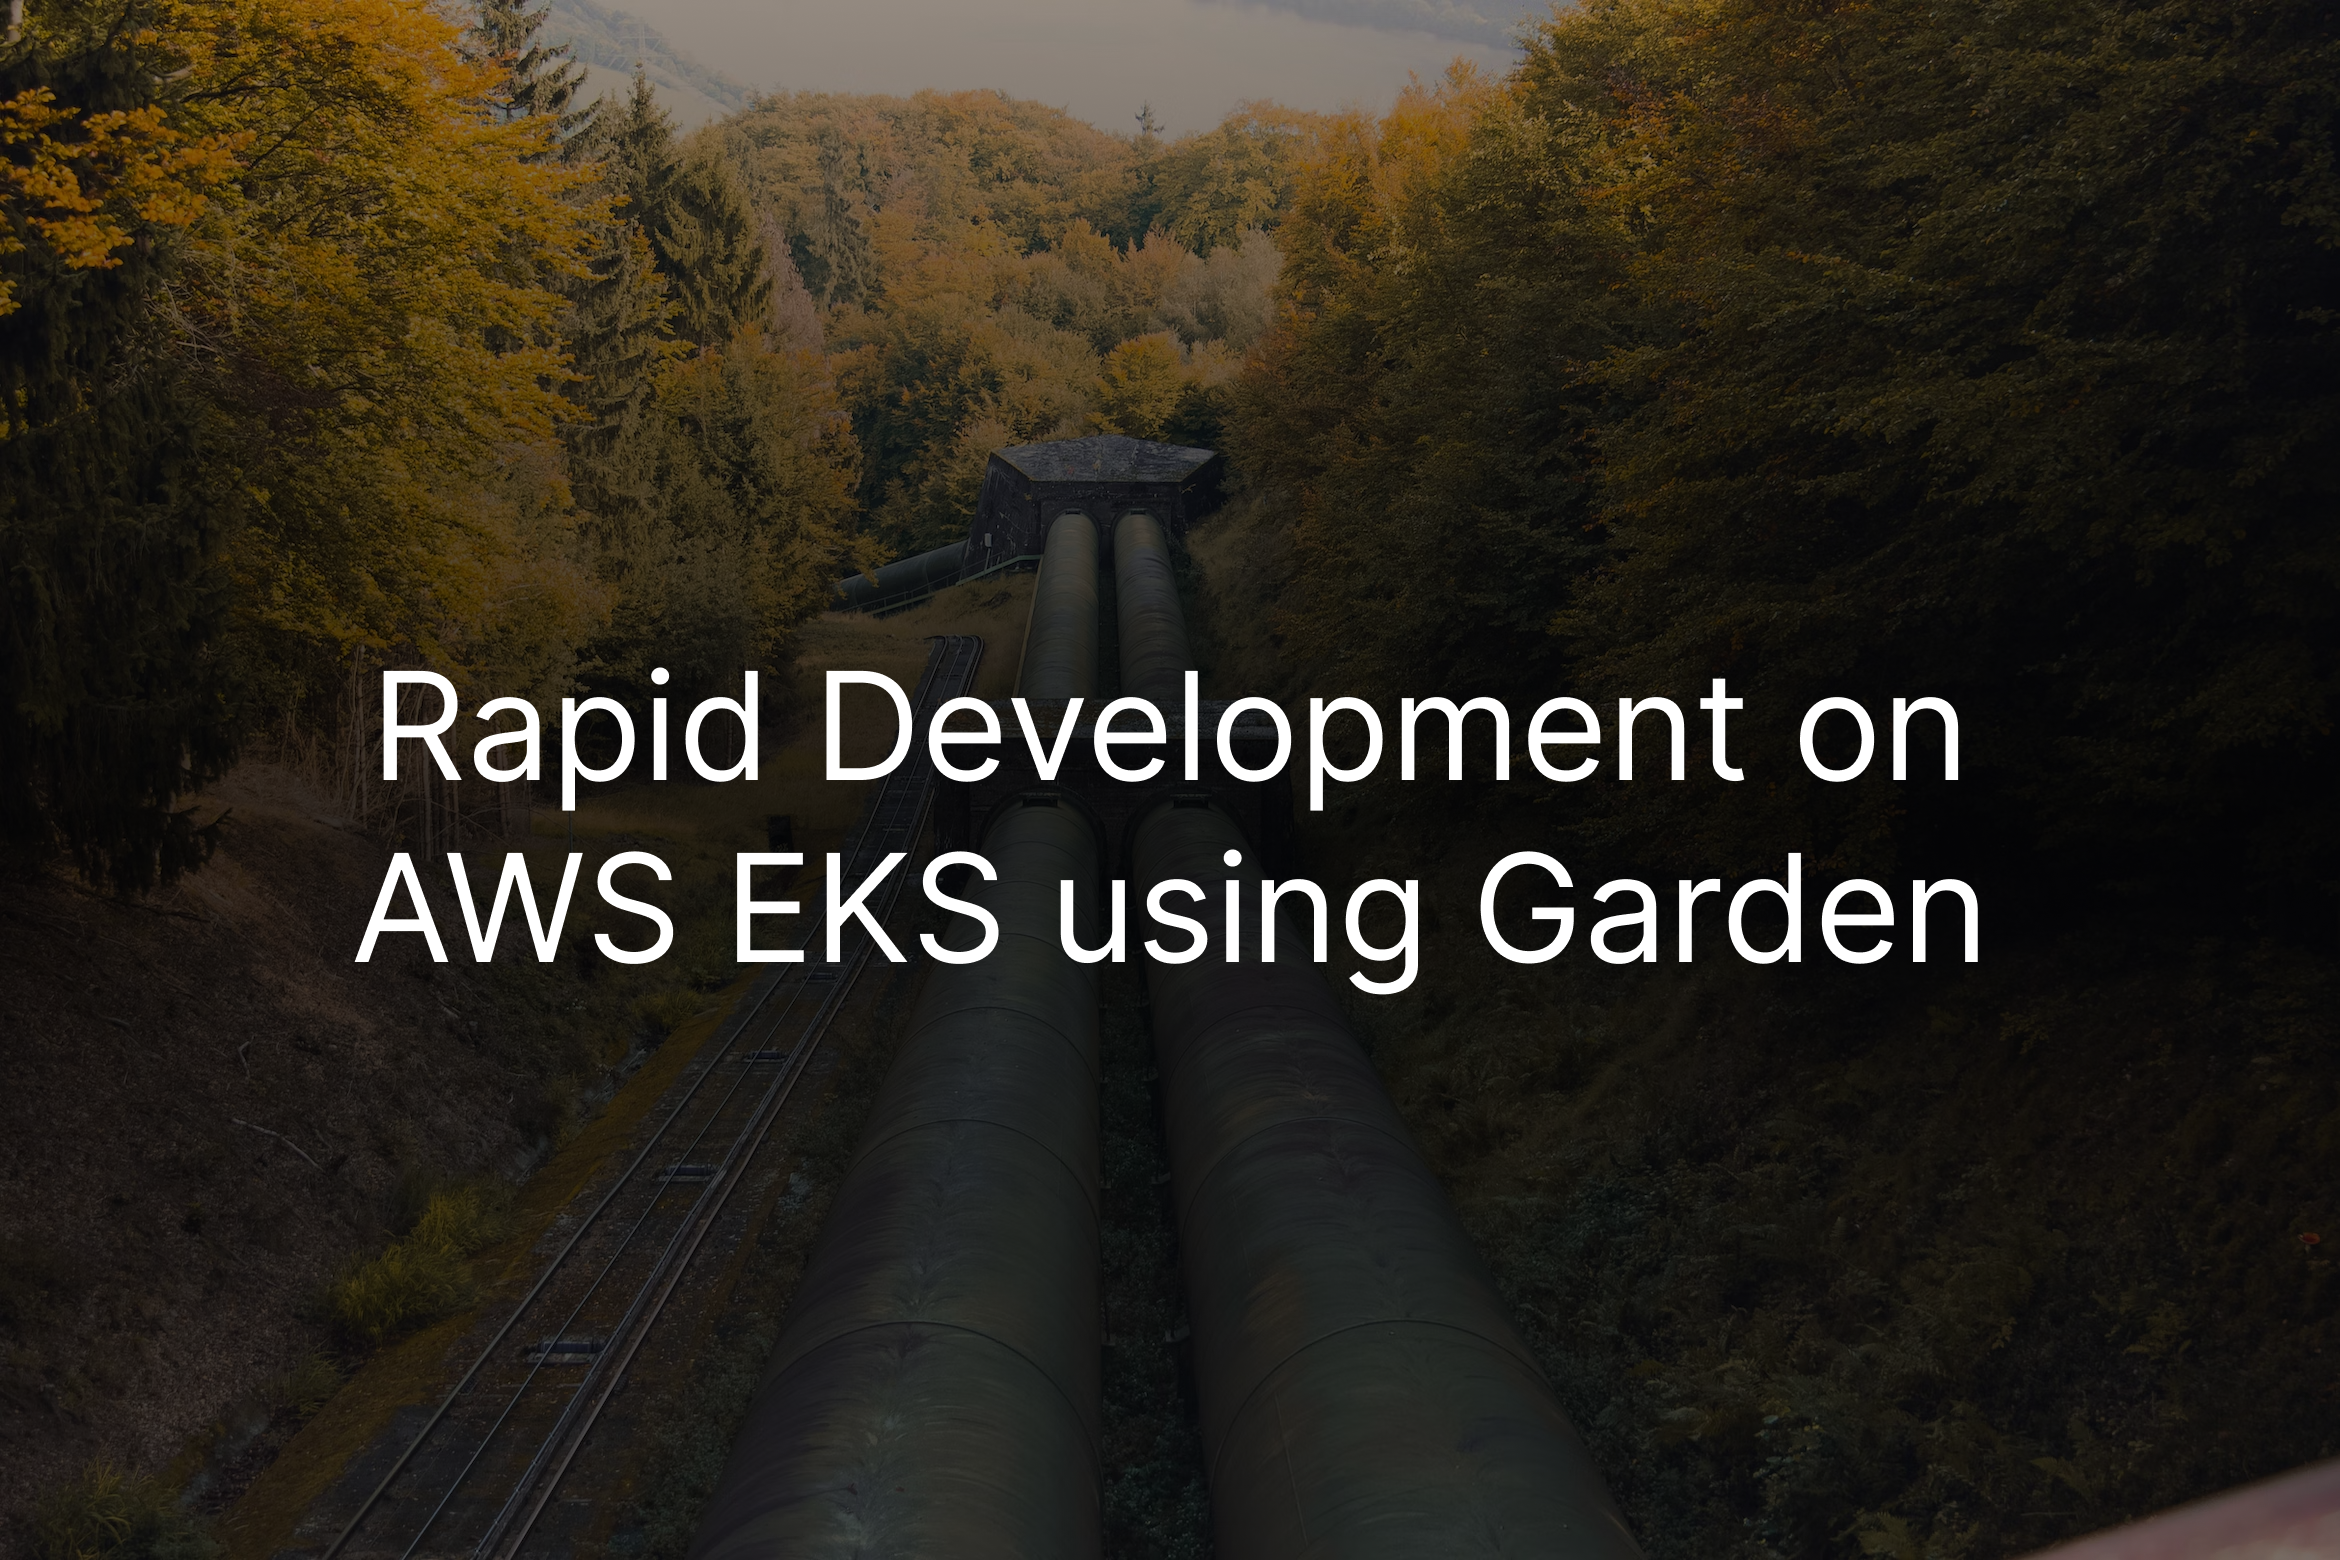 Image of a pipeline in the background and the foreground text reading, "Rapid development on AWS EKS Garden"